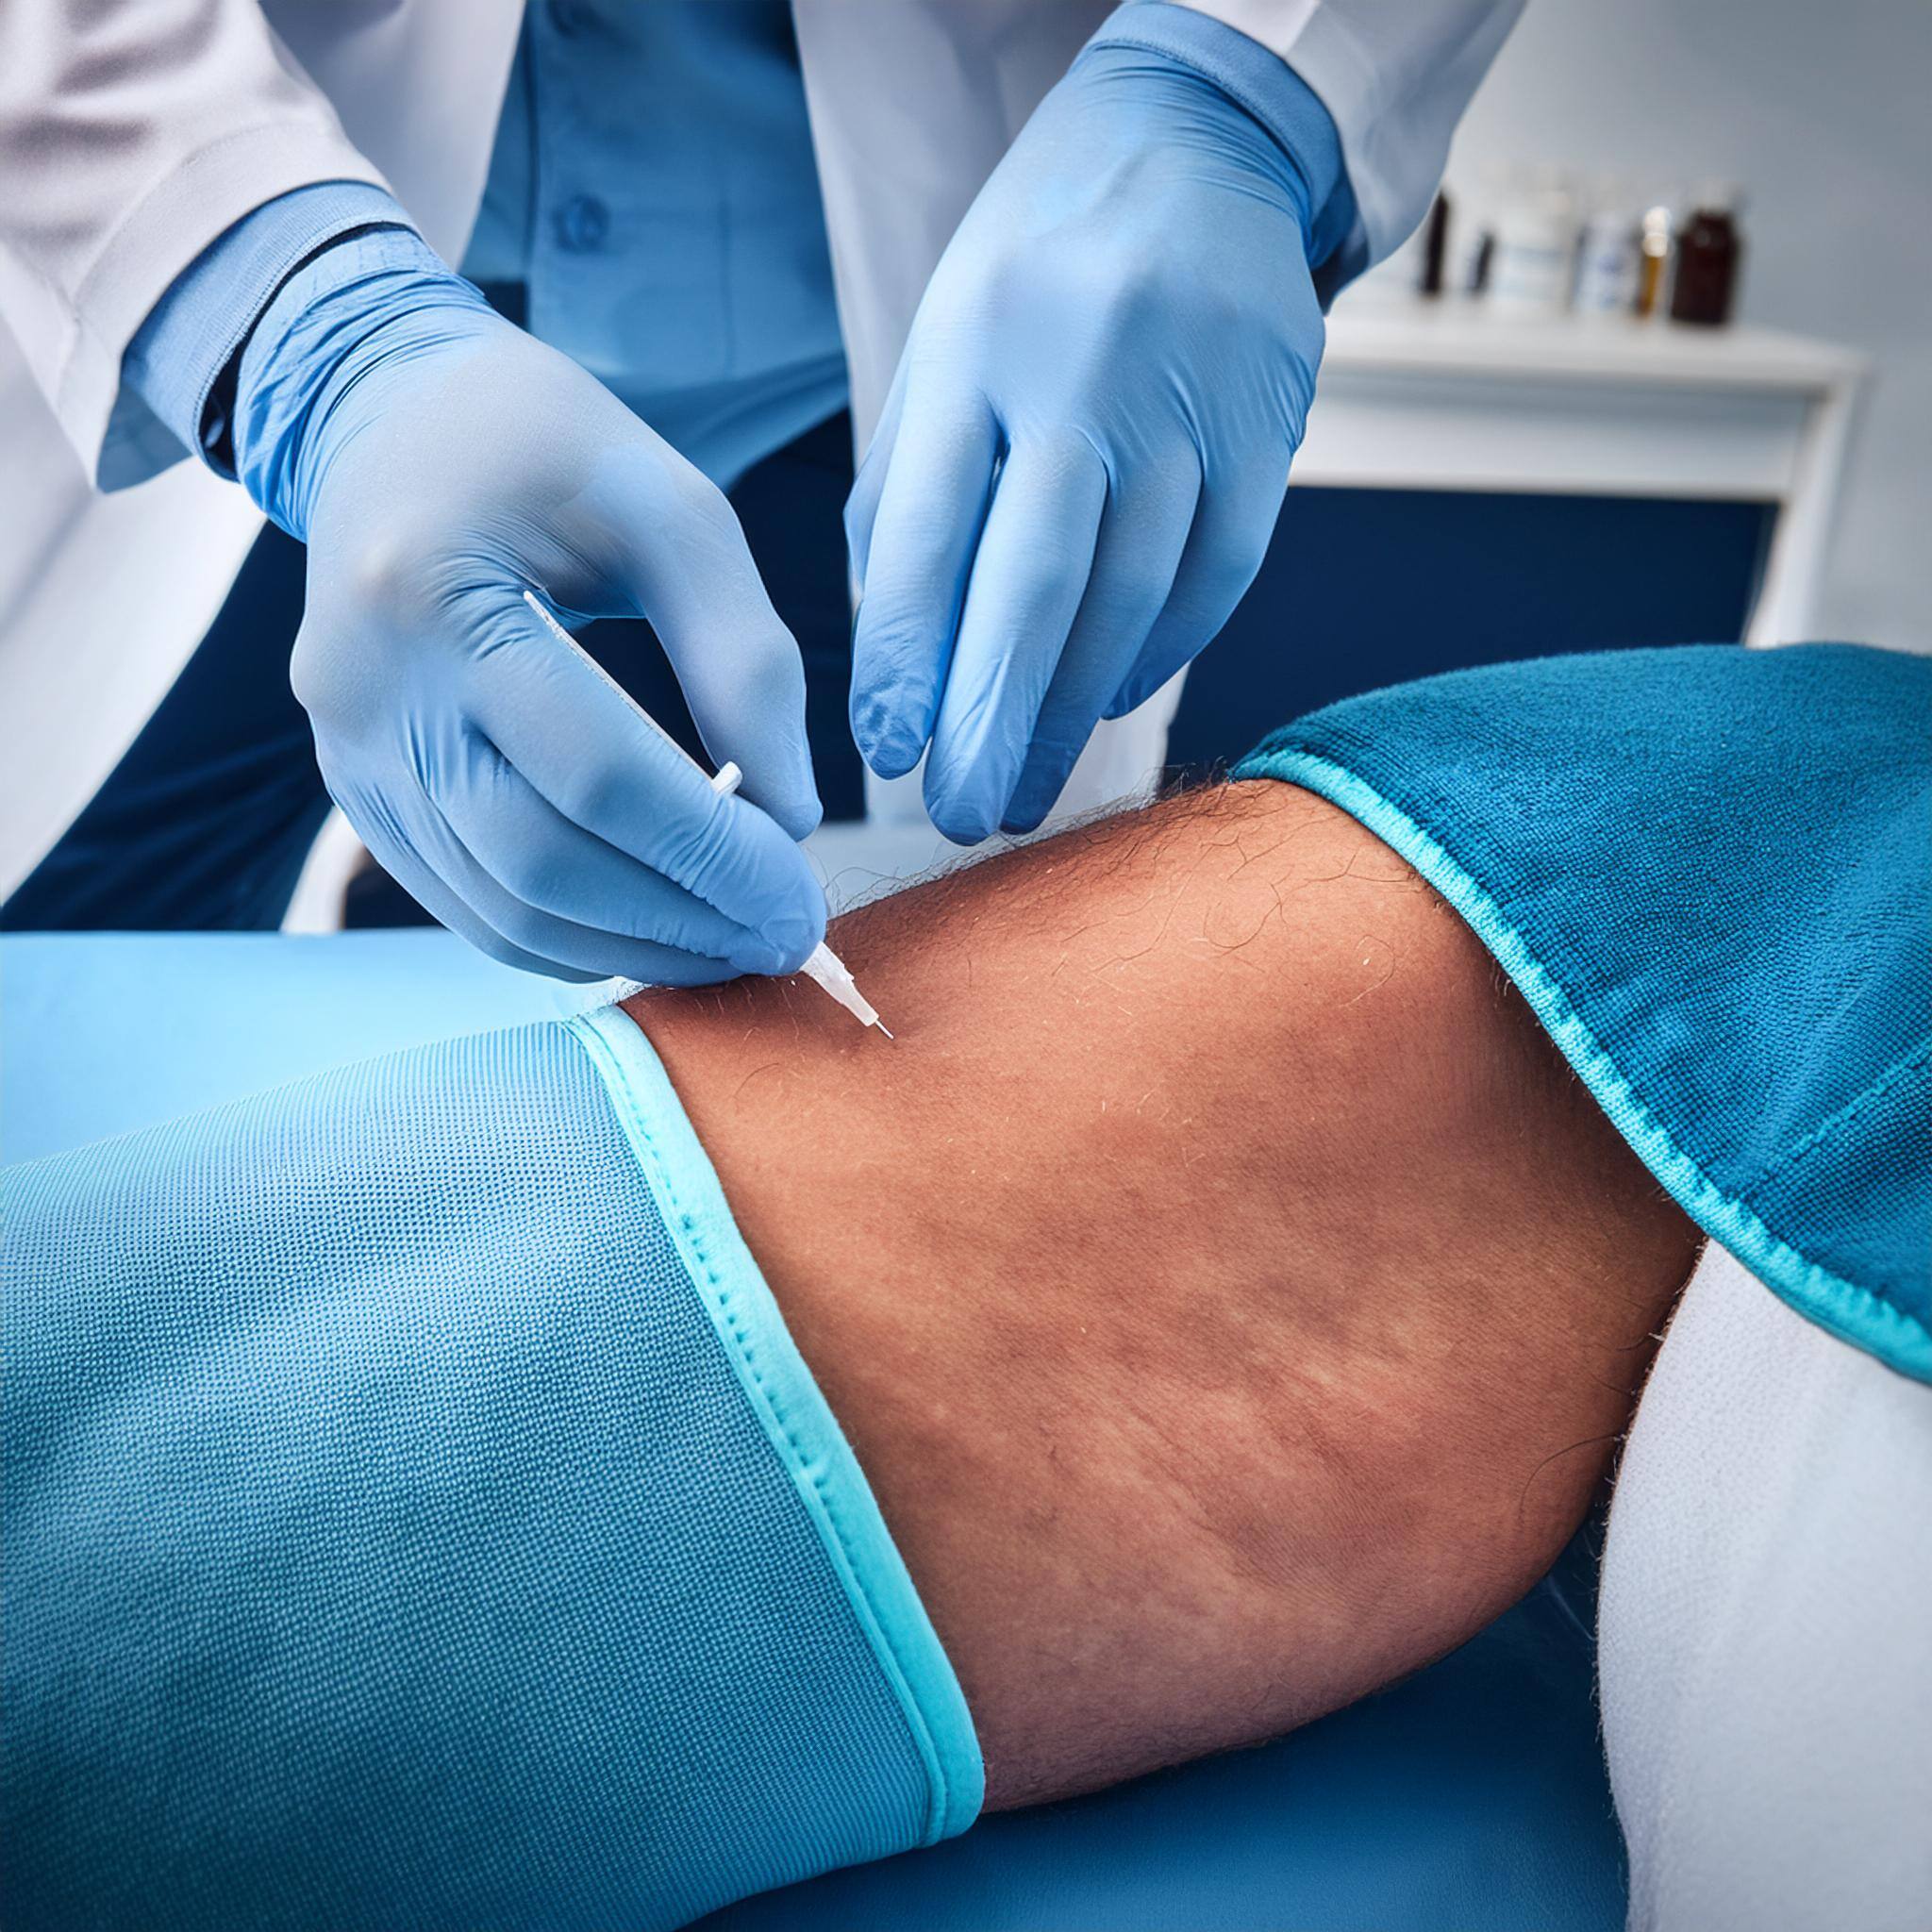 Doctor treating a patient's leg with varicose veins with an injection 